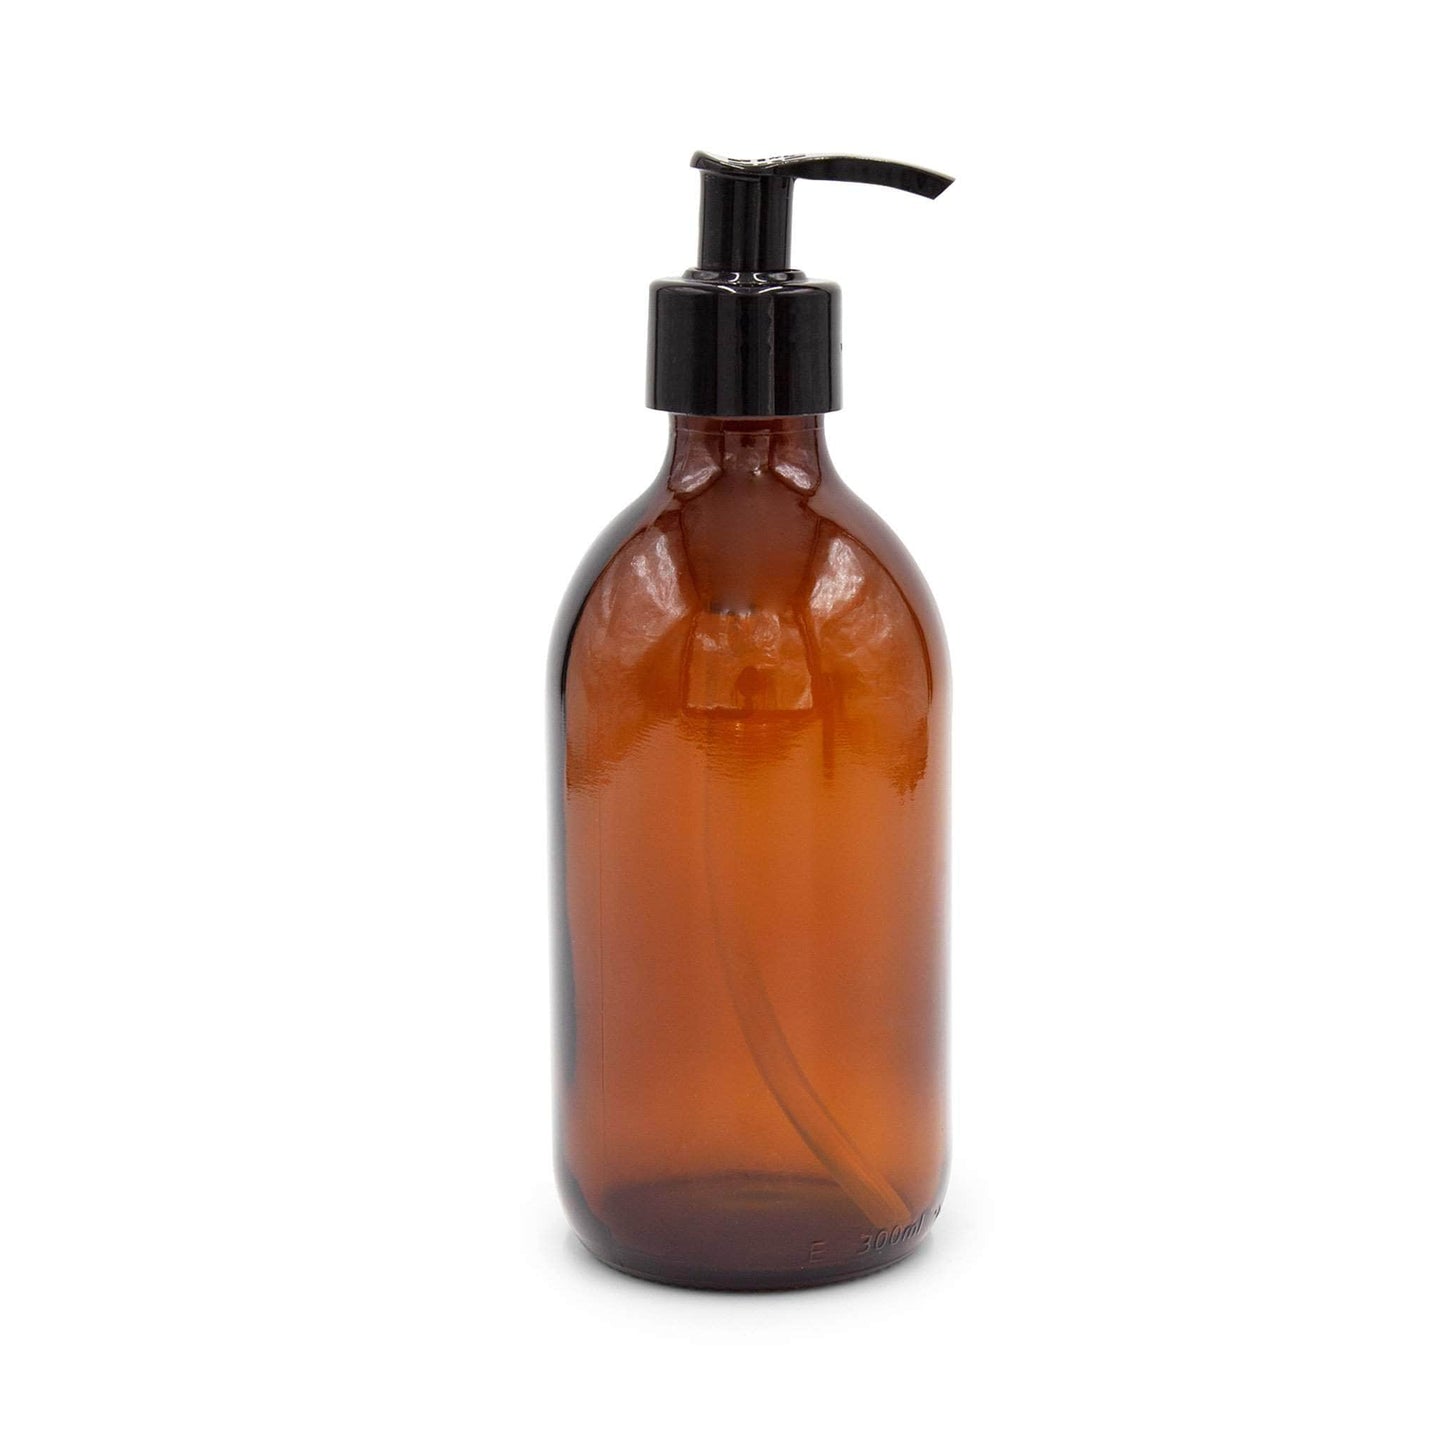 Faerly Bottles Lotion Pump 300ml Amber Glass Sirop Bottle - with Trigger Spray or Lotion Pump